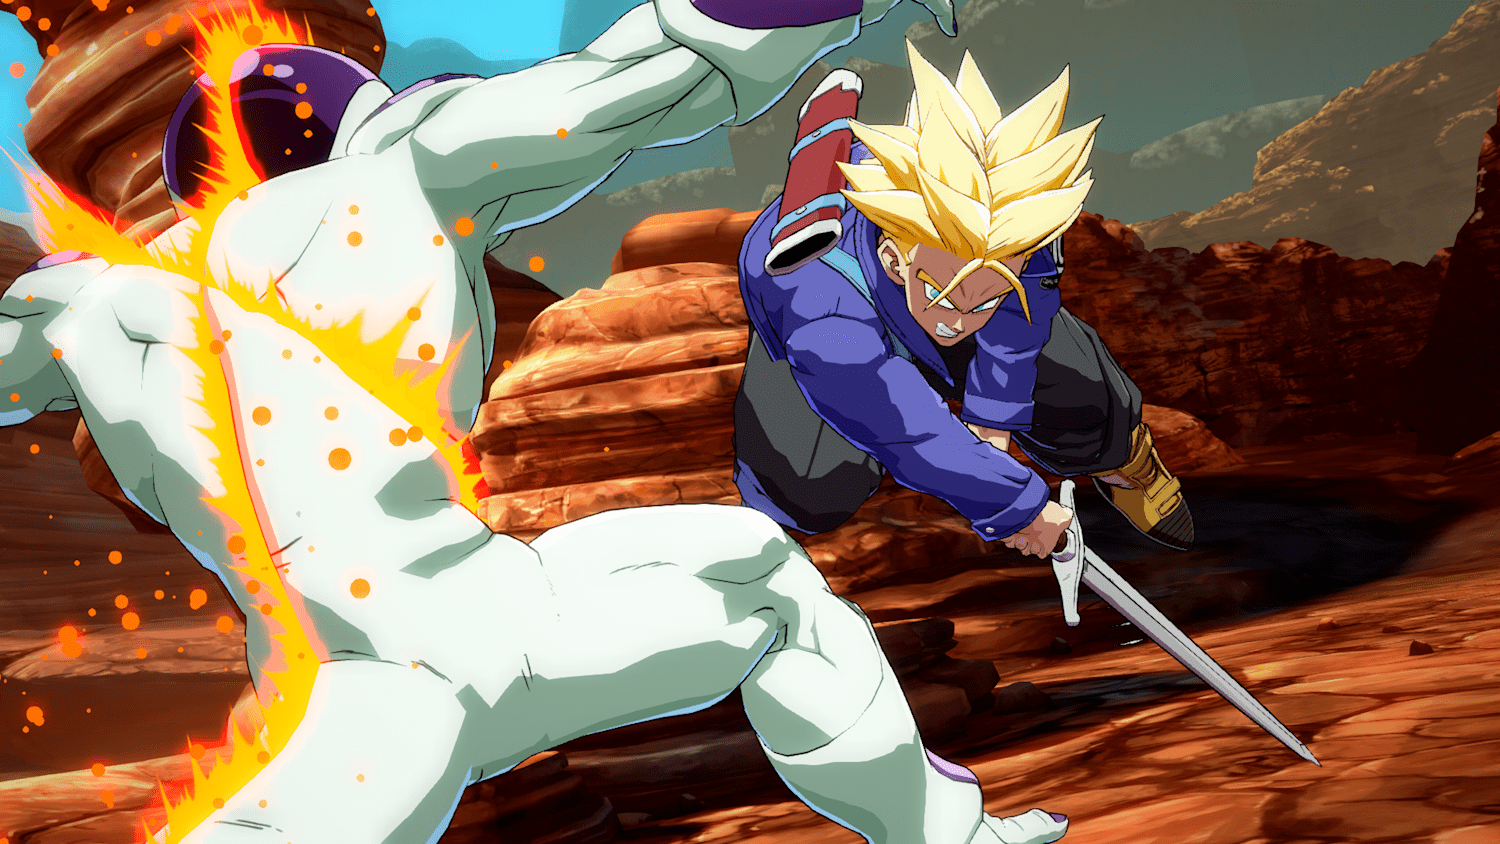 10 expert **tips** for playing Dragon Ball FighterZ